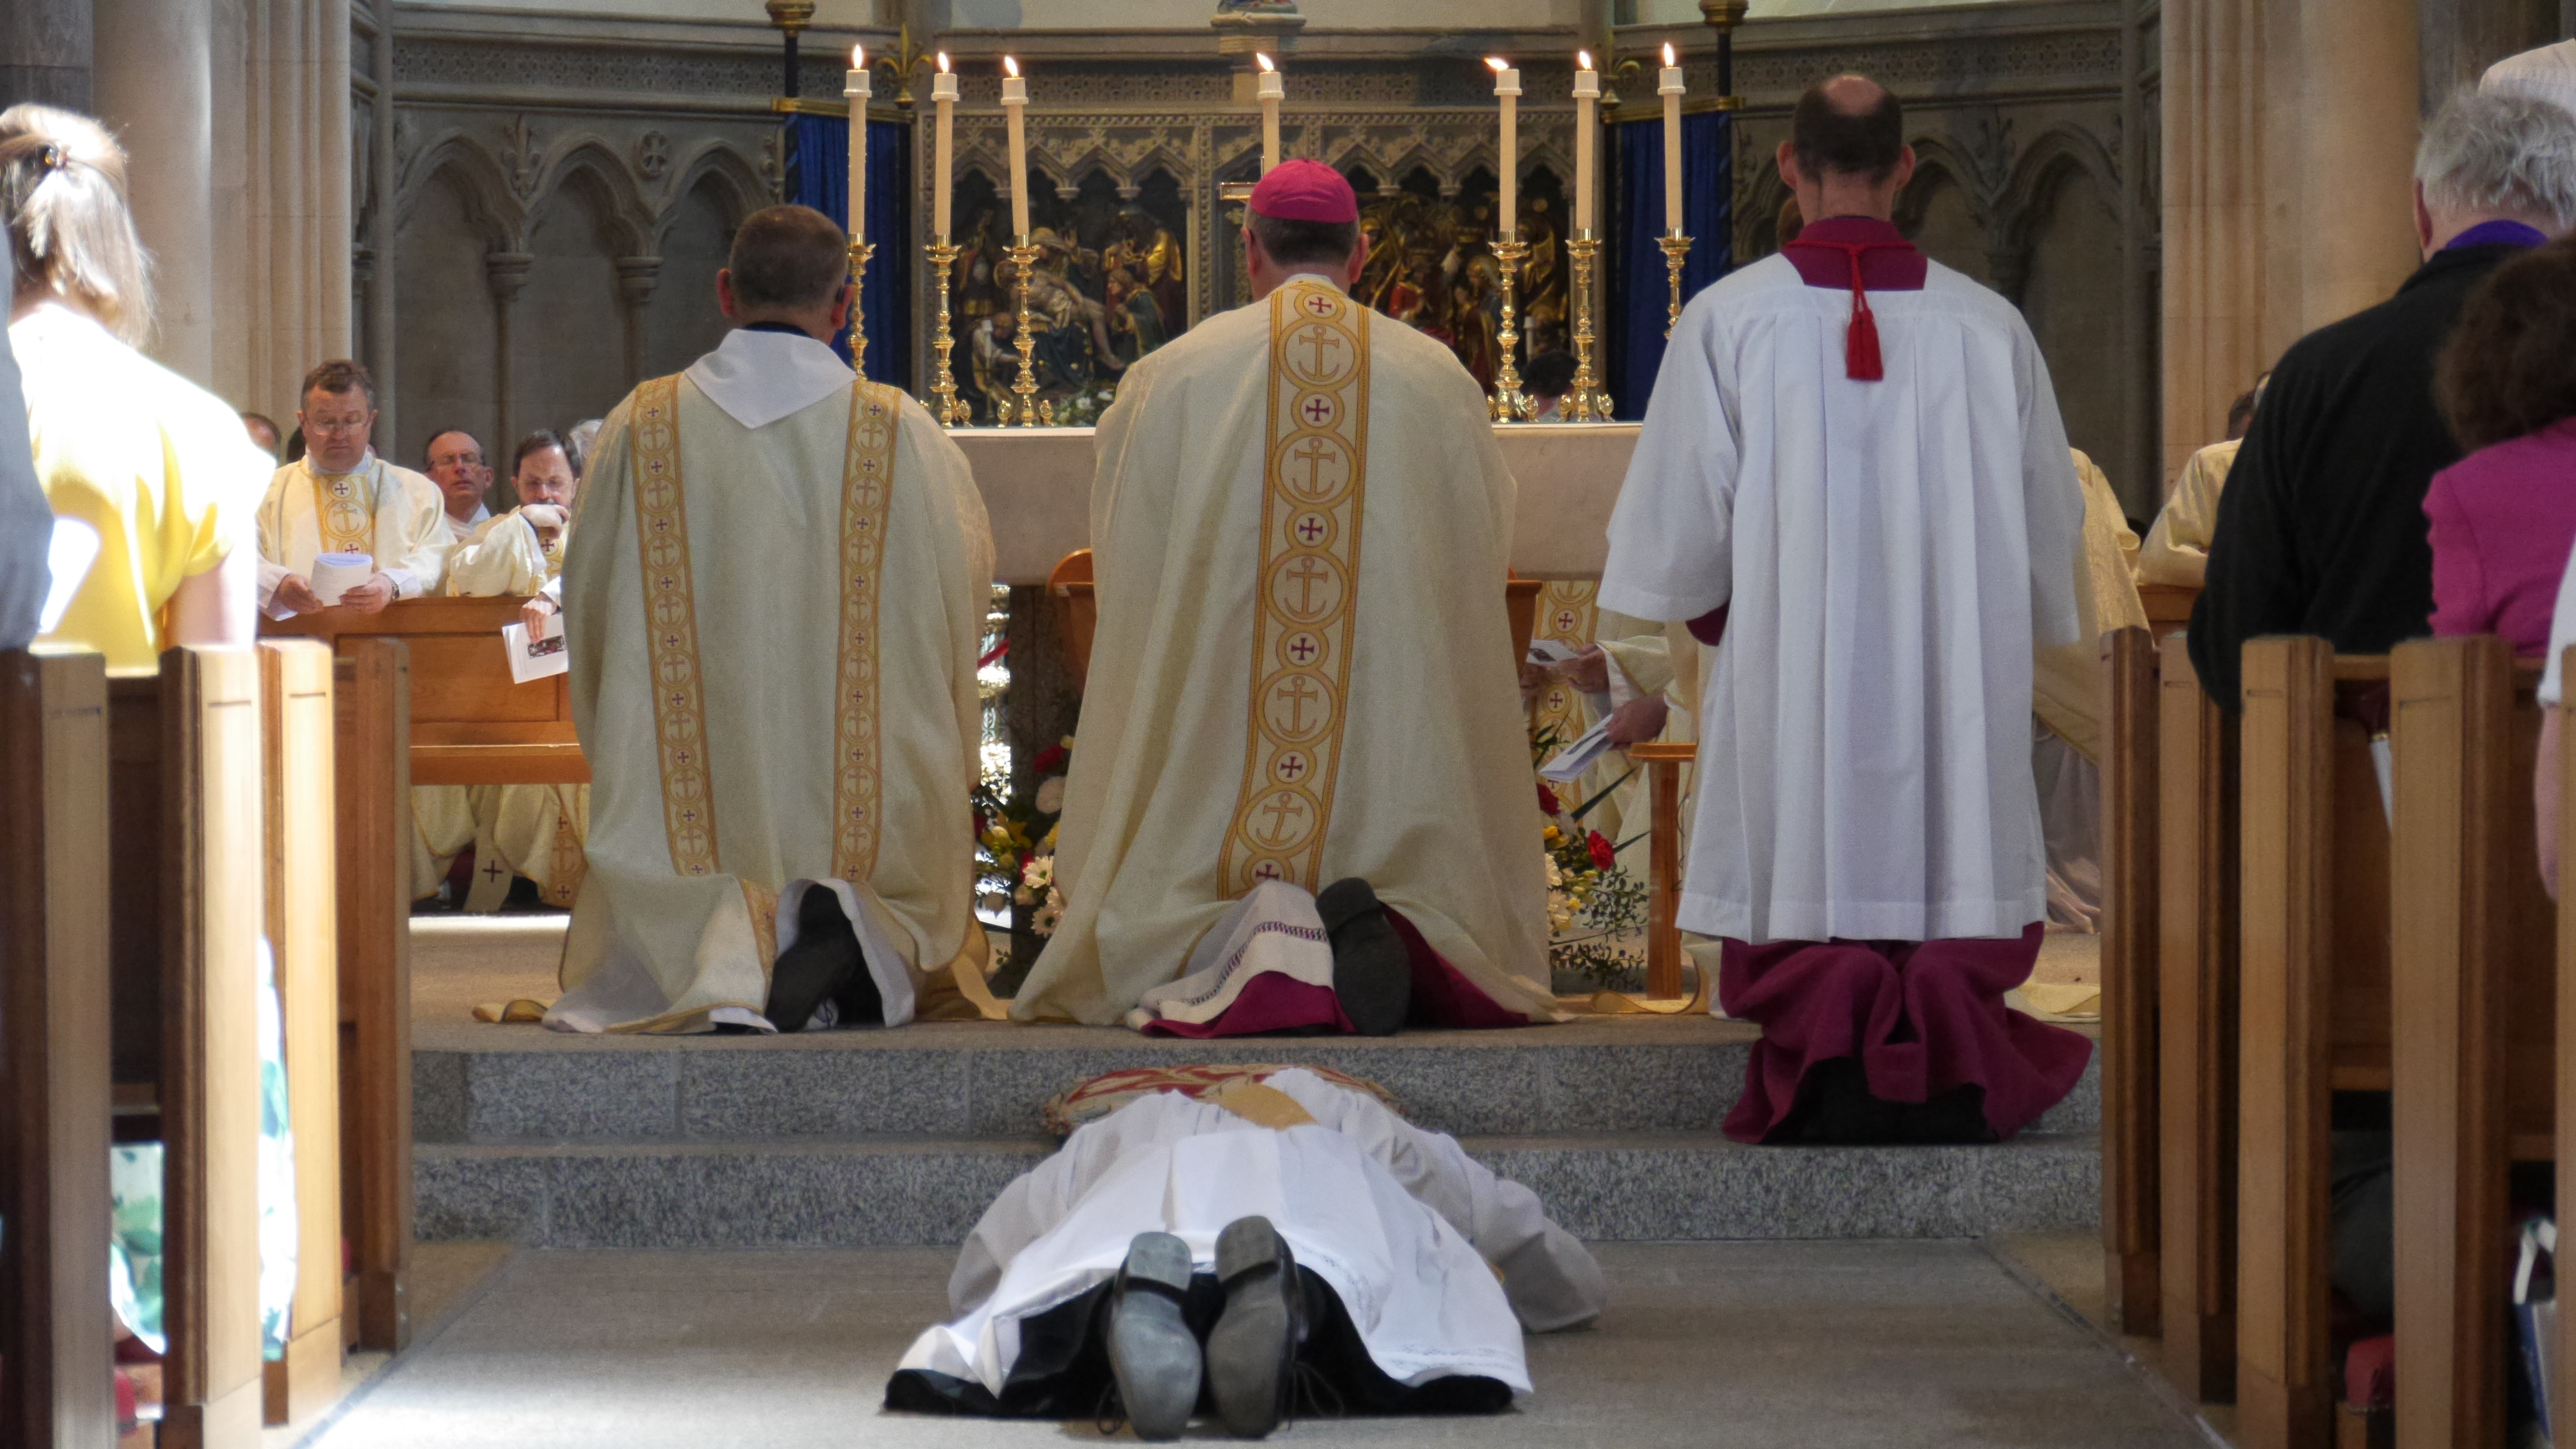 Deacon James lies prostrate on the floor while the bishop, priests, and parishioners recite the Litany of Saints